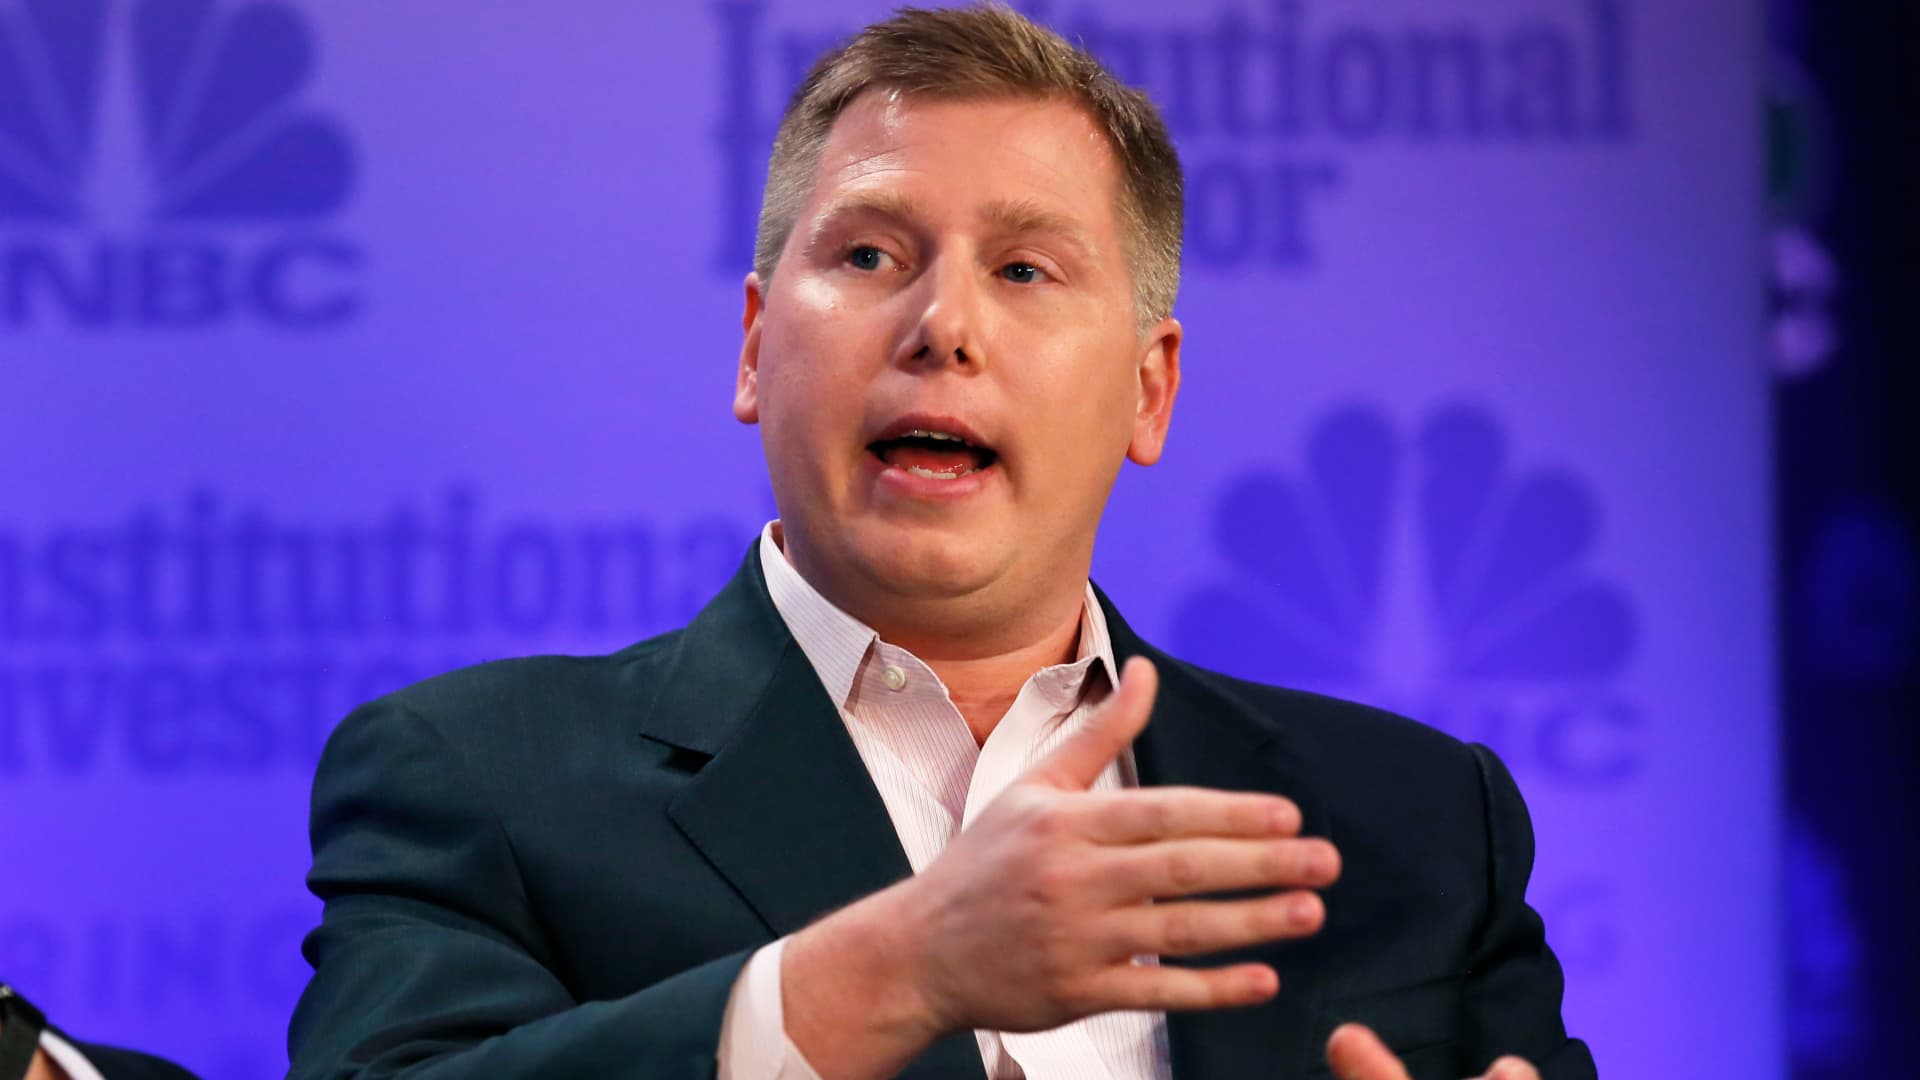 DCG’s Barry Silbert writes letter to investors after FTX collapse